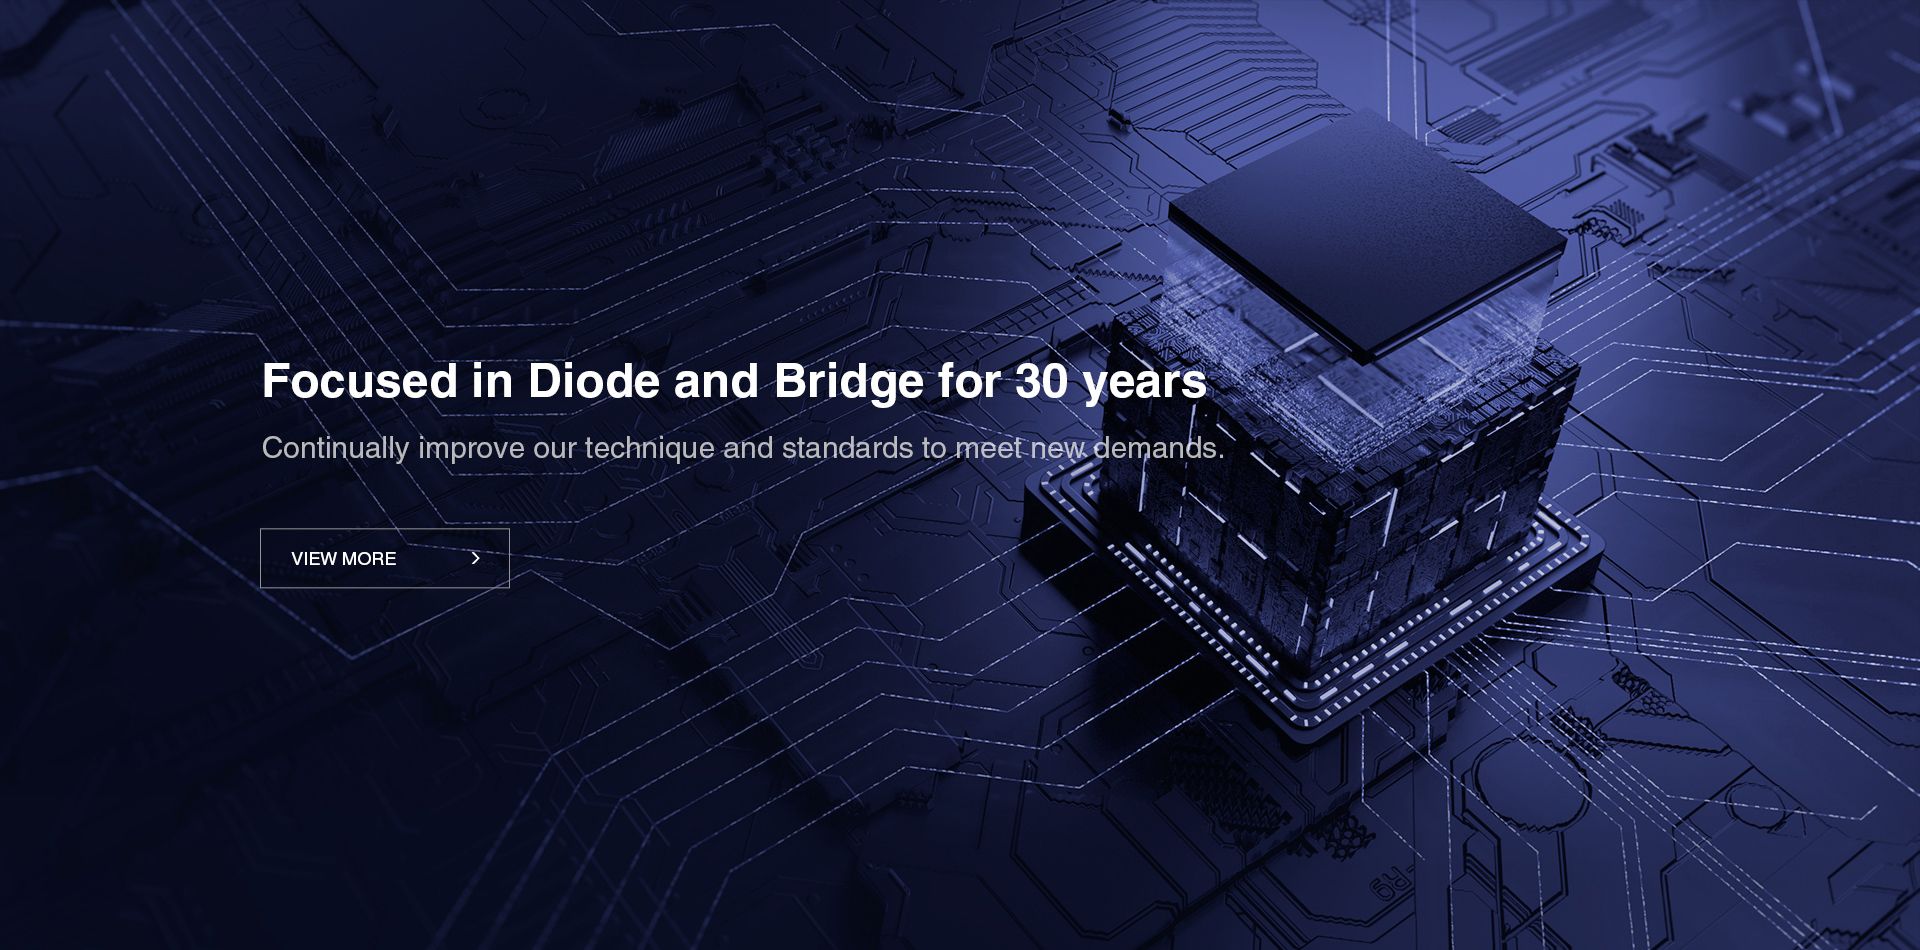 Focused in Diode and Bridge for 30 years